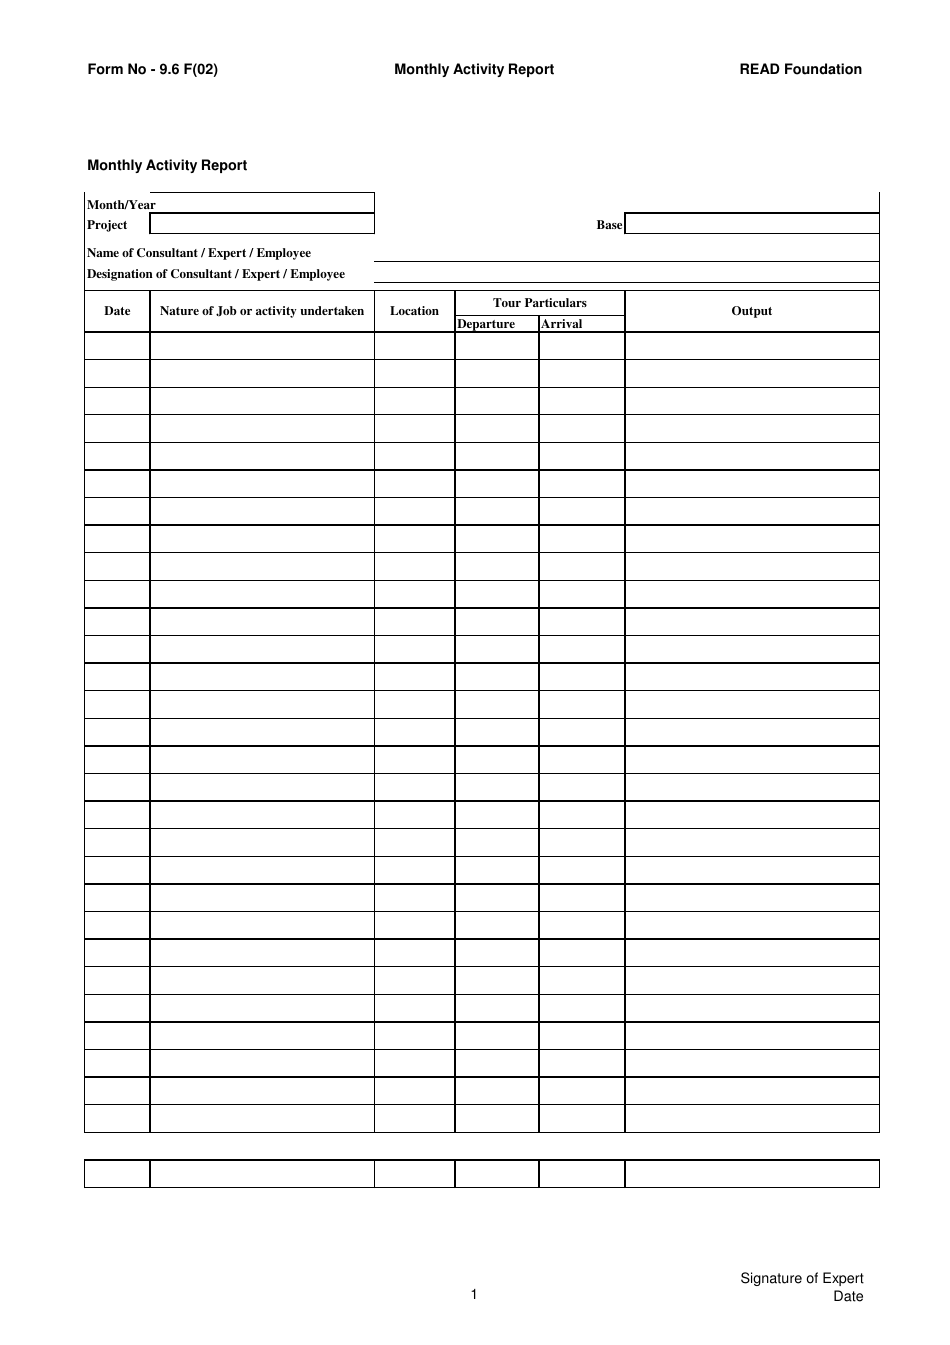 Monthly Activity Report Template, Page 1